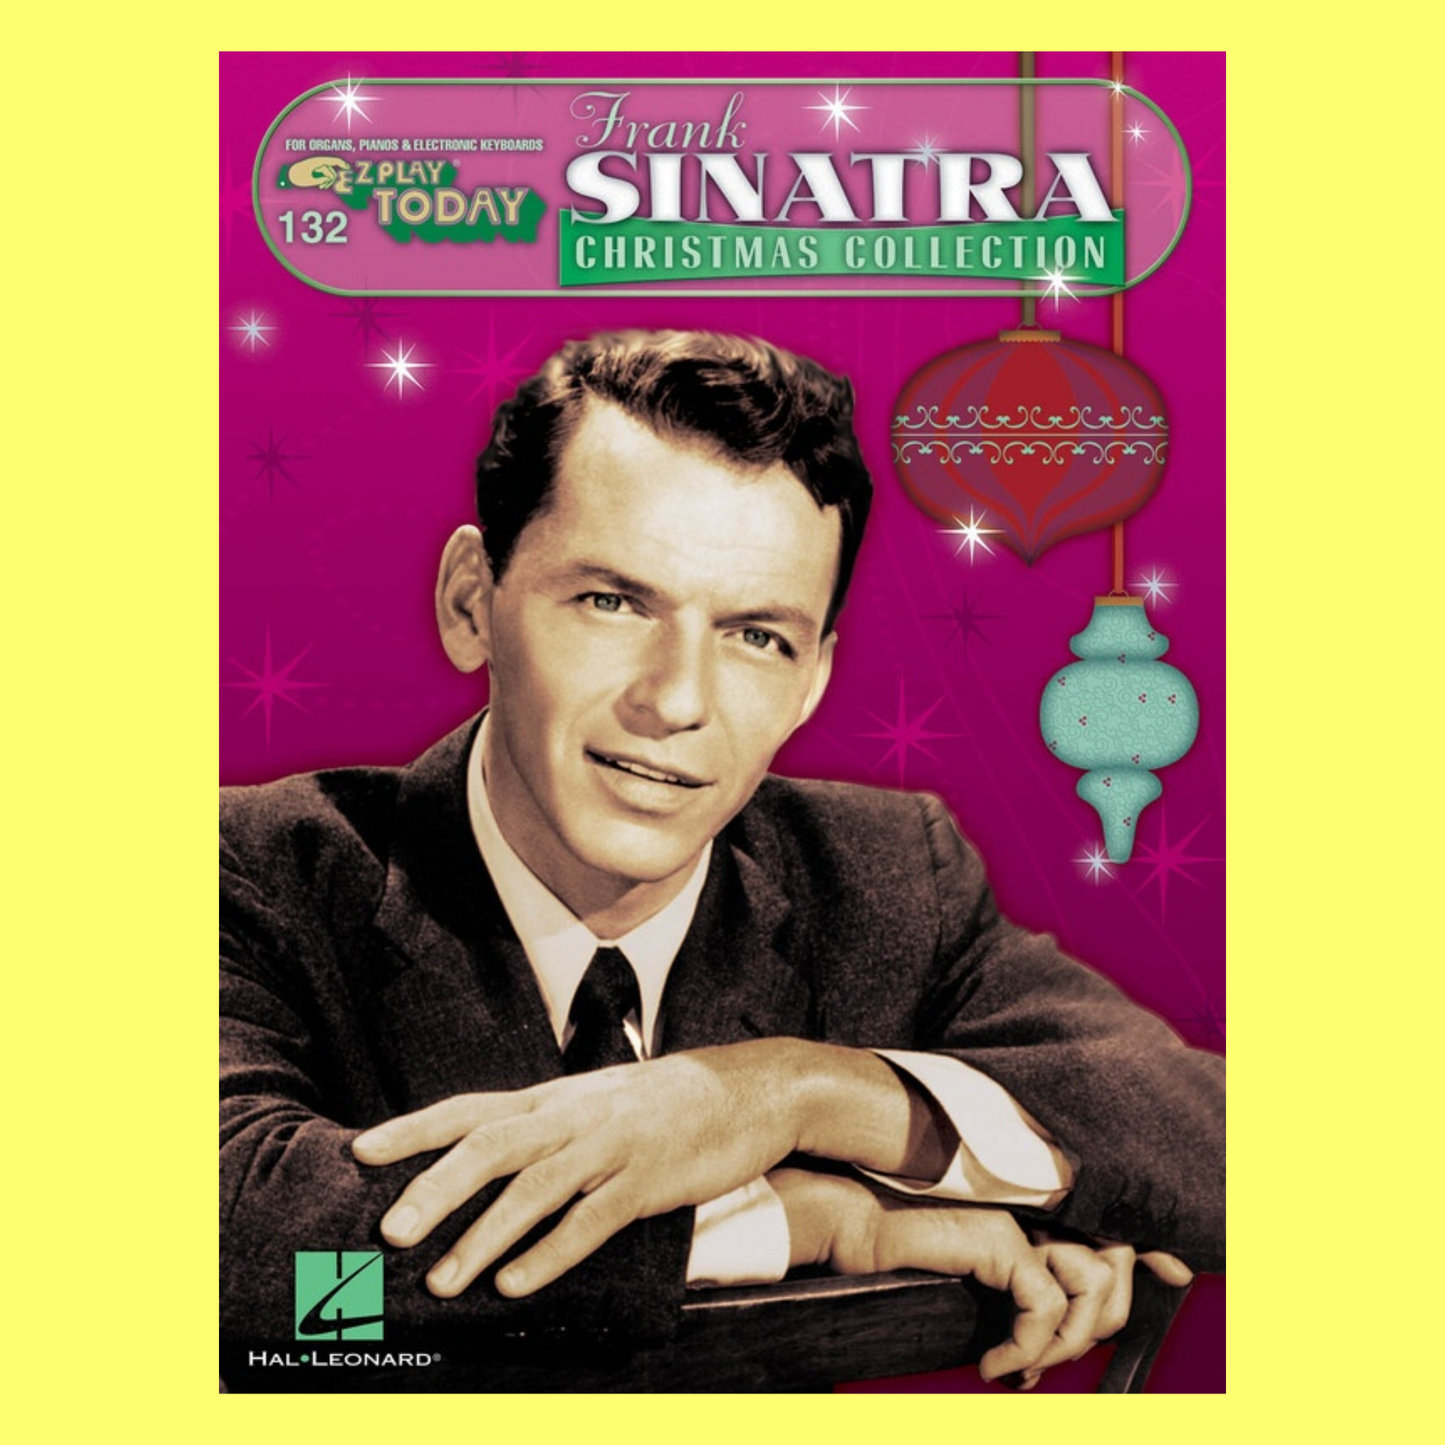 Frank Sinatra Christmas Collection - EZ Play Piano Volume 132 Songbook